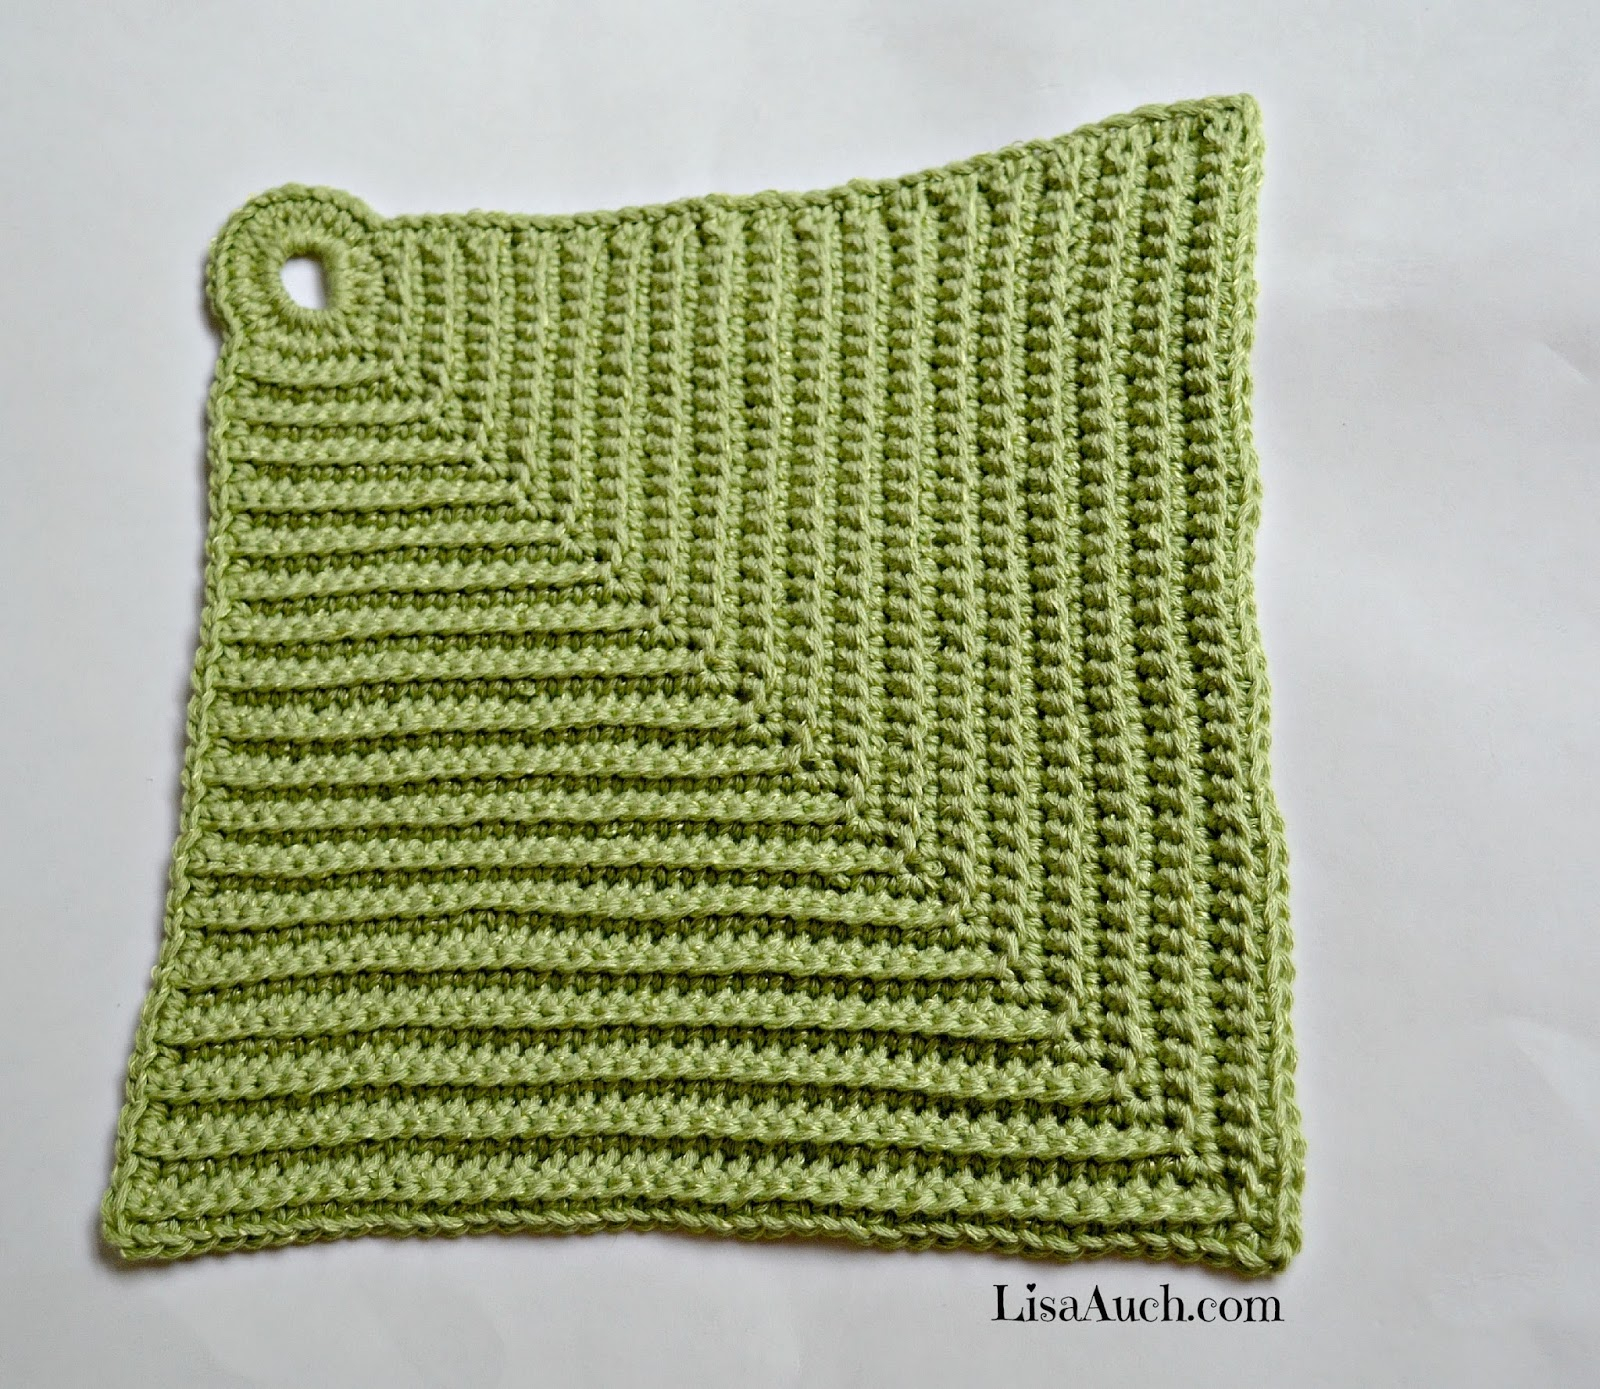 Dishcloth Crochet Patterns Free Crochet Patterns And Designs Lisaauch Free Easy Crochet